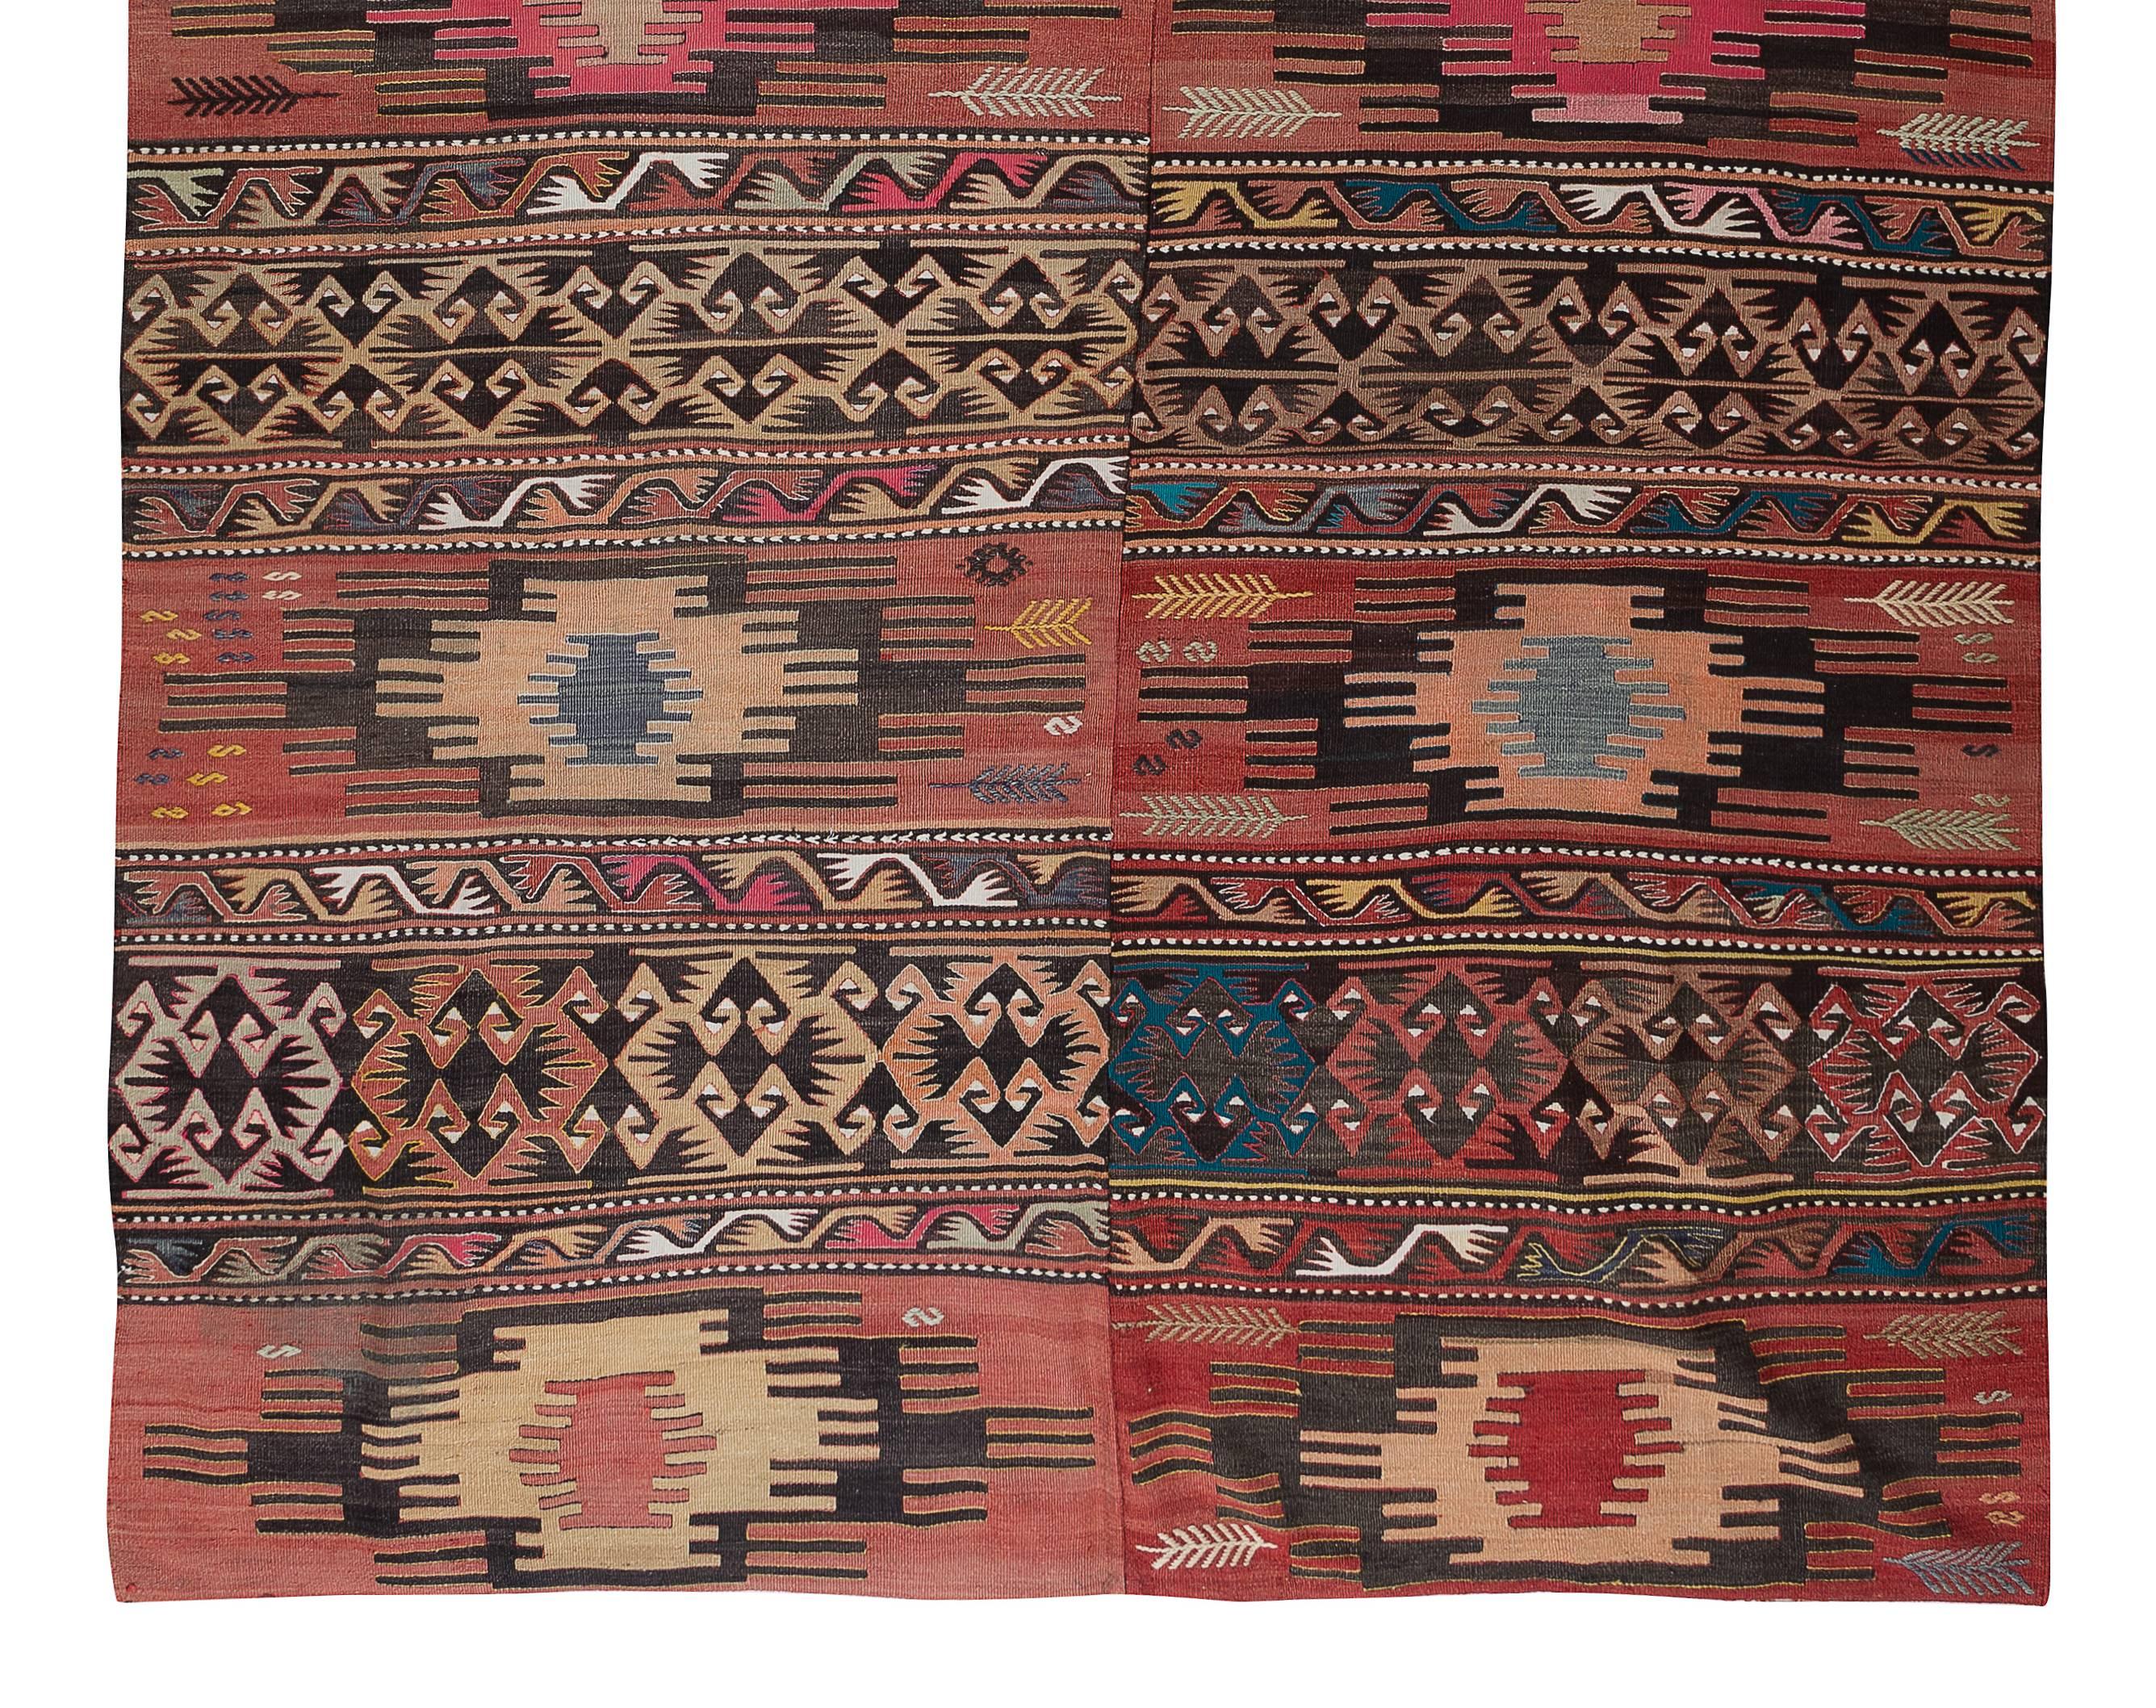 20th Century 6.3x10.2 Ft Vintage Hand-Woven Nomadic Anatolian Kilim 'Flat-Weave', 100% Wool For Sale